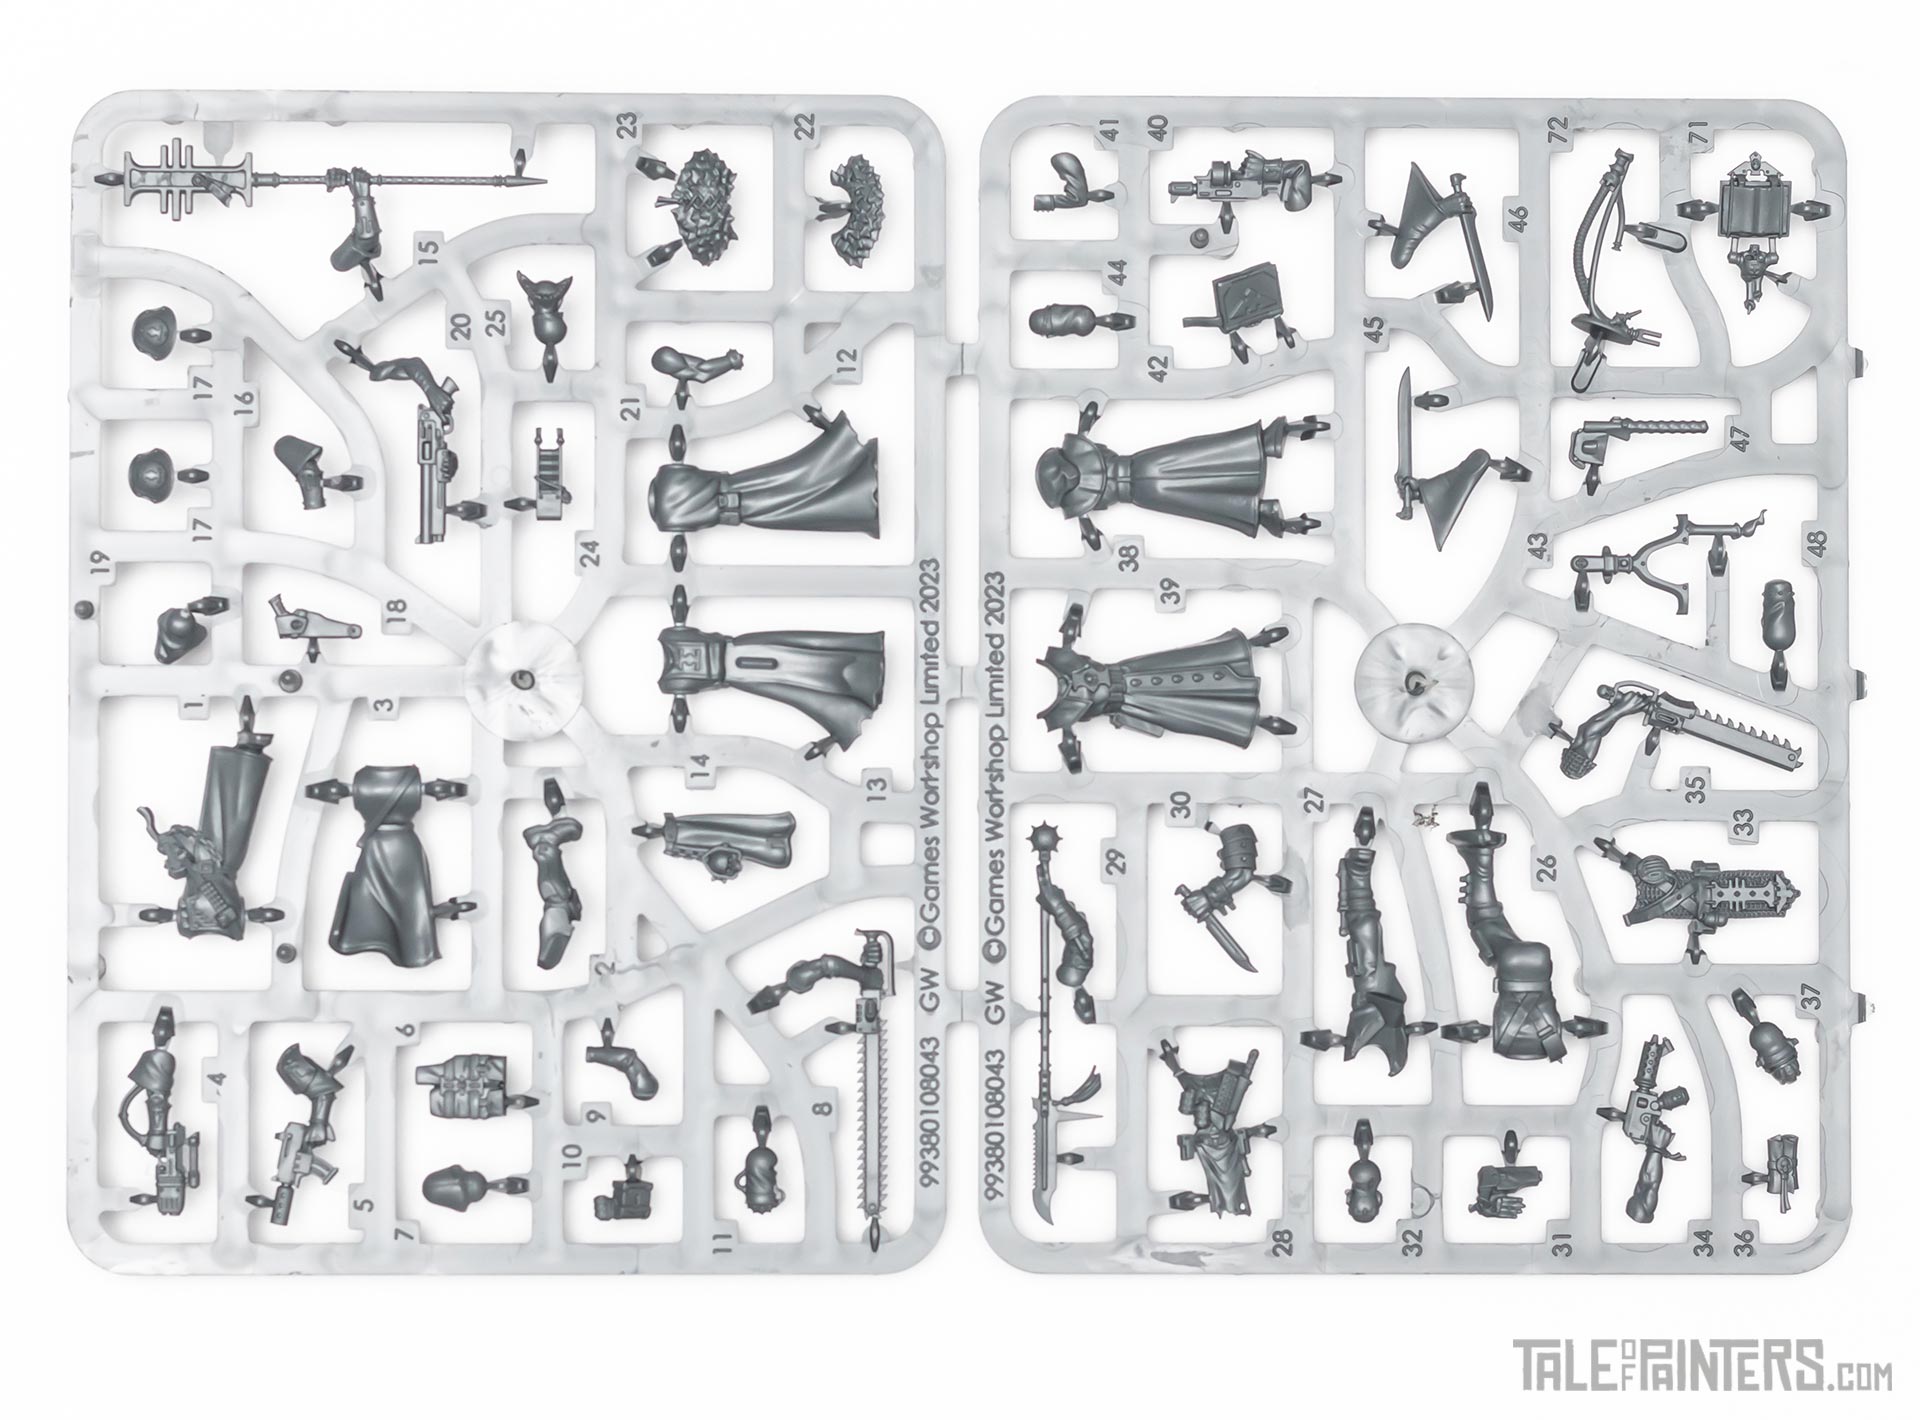 Kill Team: Ashes of Faith review, sprues 1 and 2 of the Inquisitorial Agents